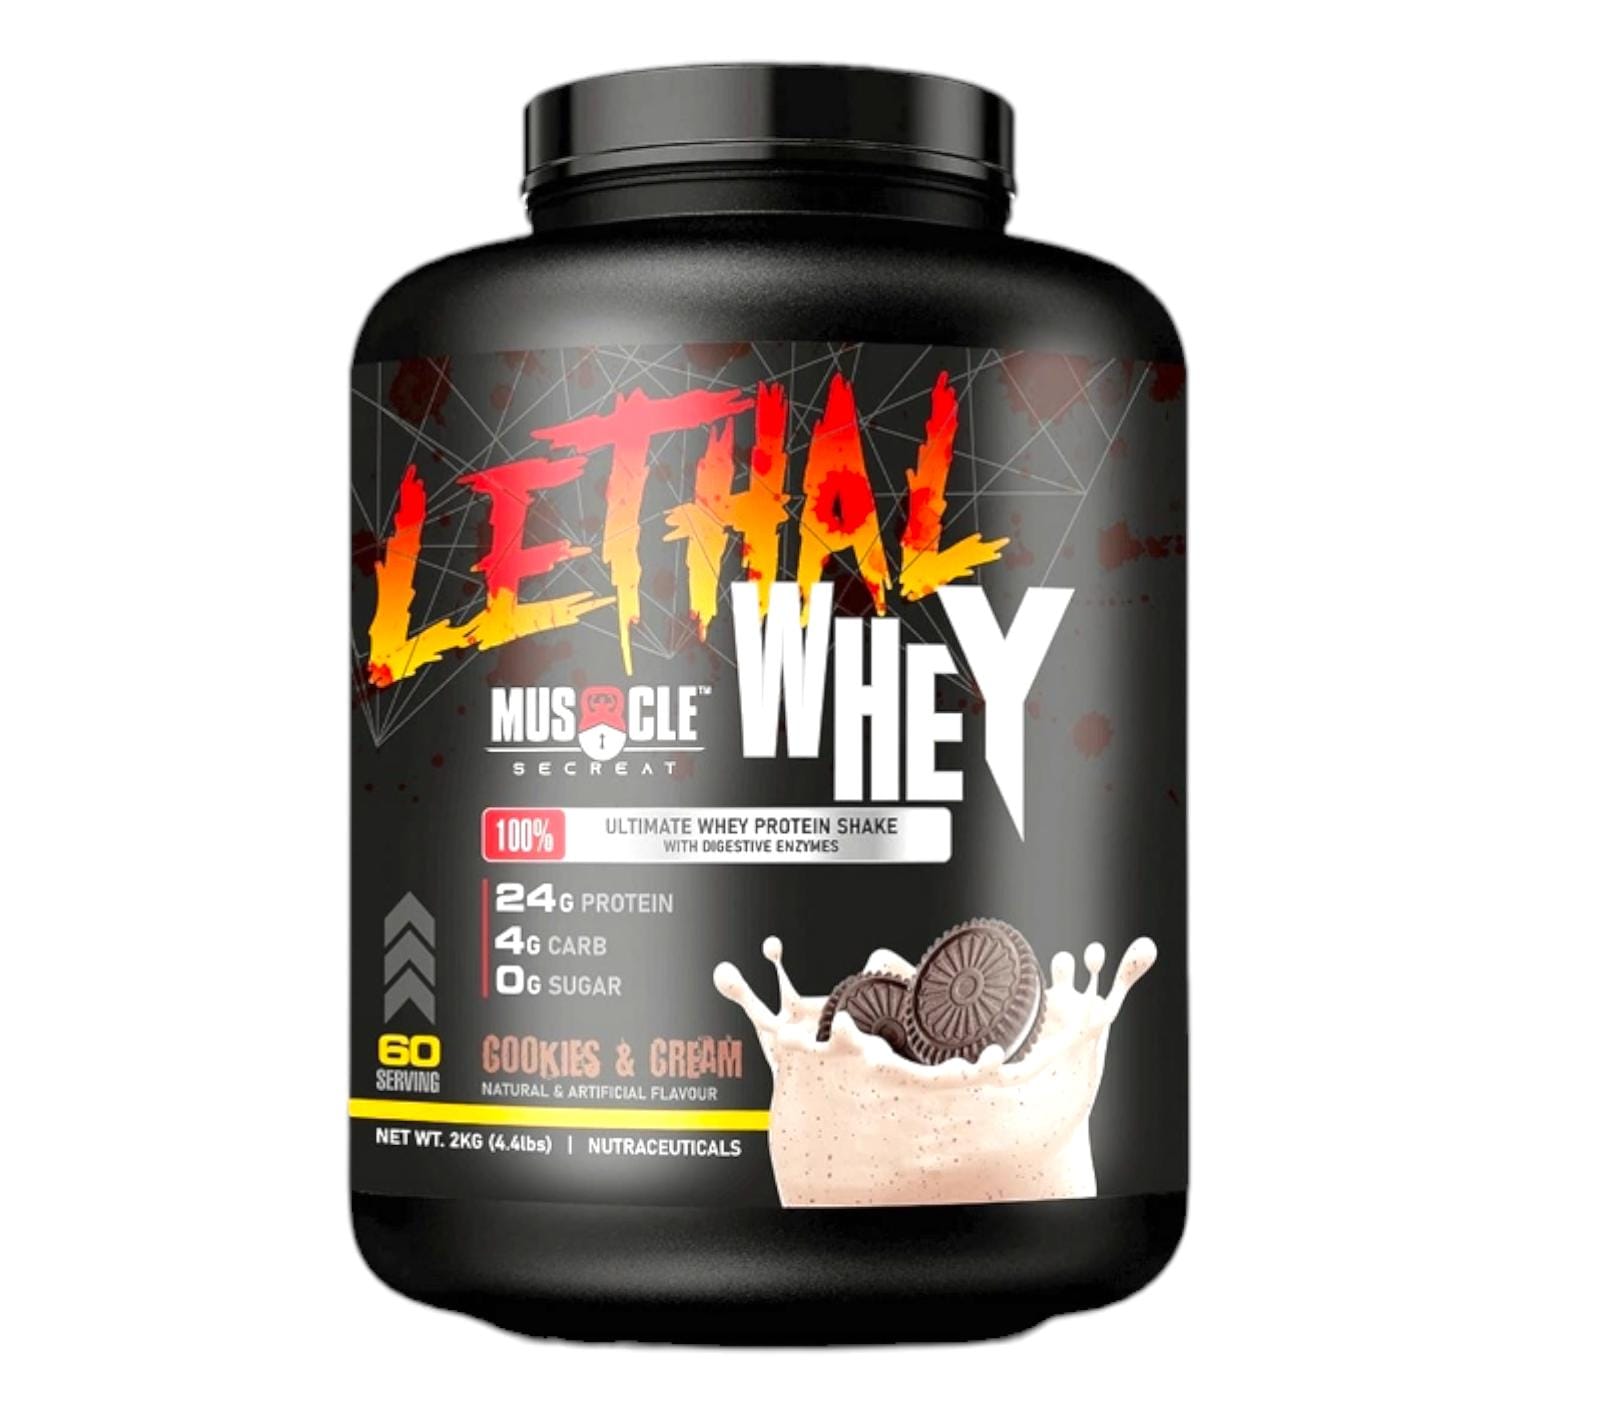 Lethal Whey